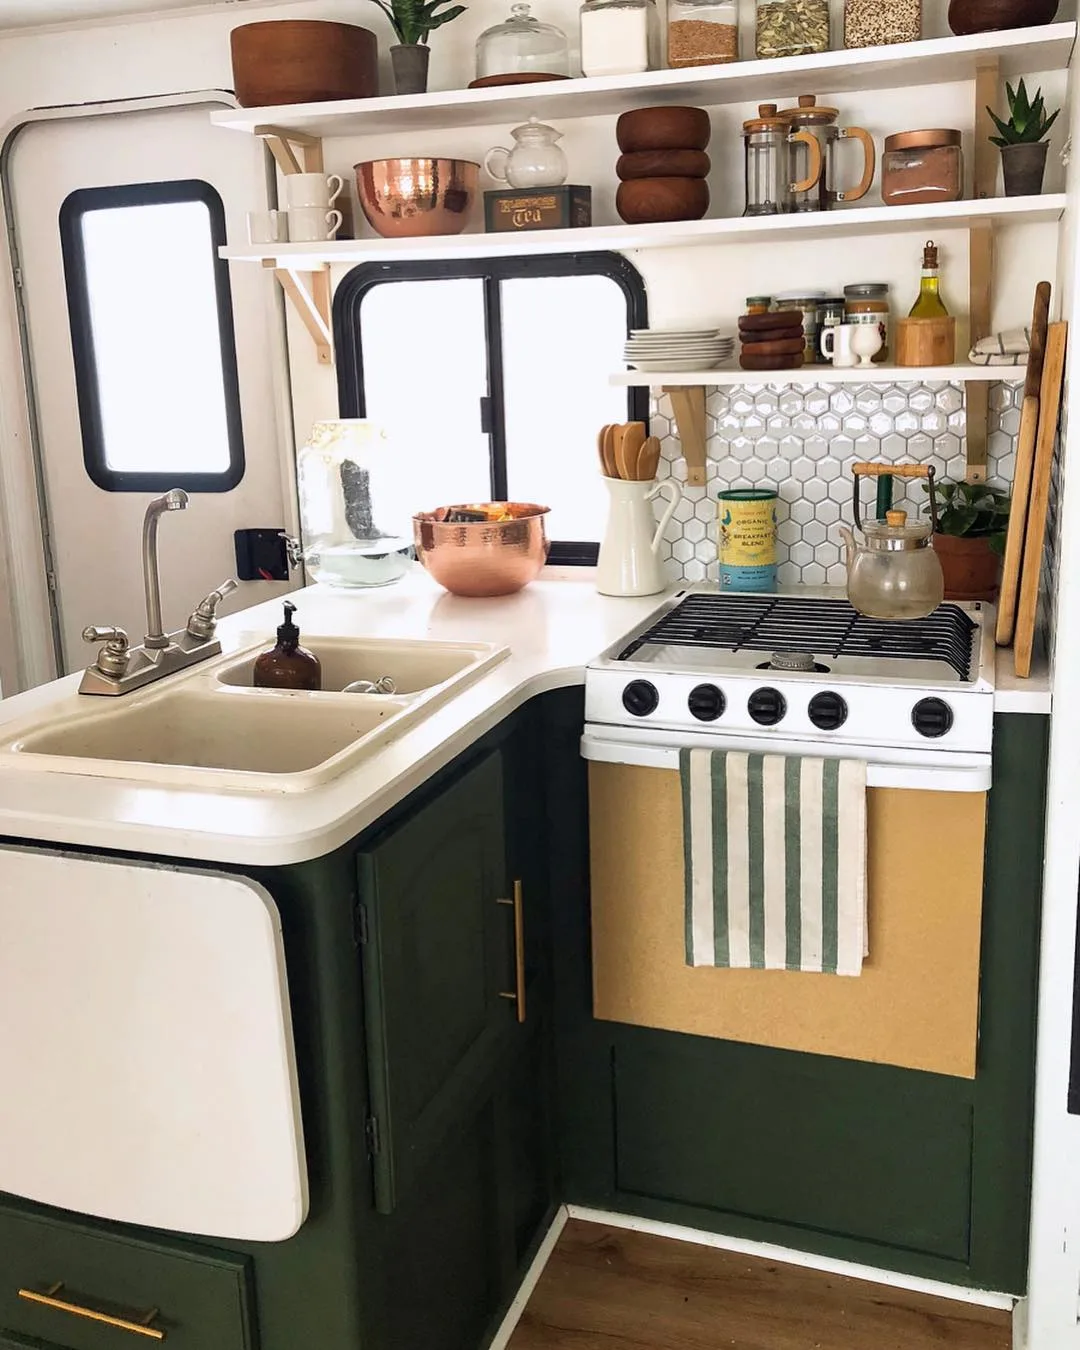 Check out this beautiful RV kitchen transformation! 